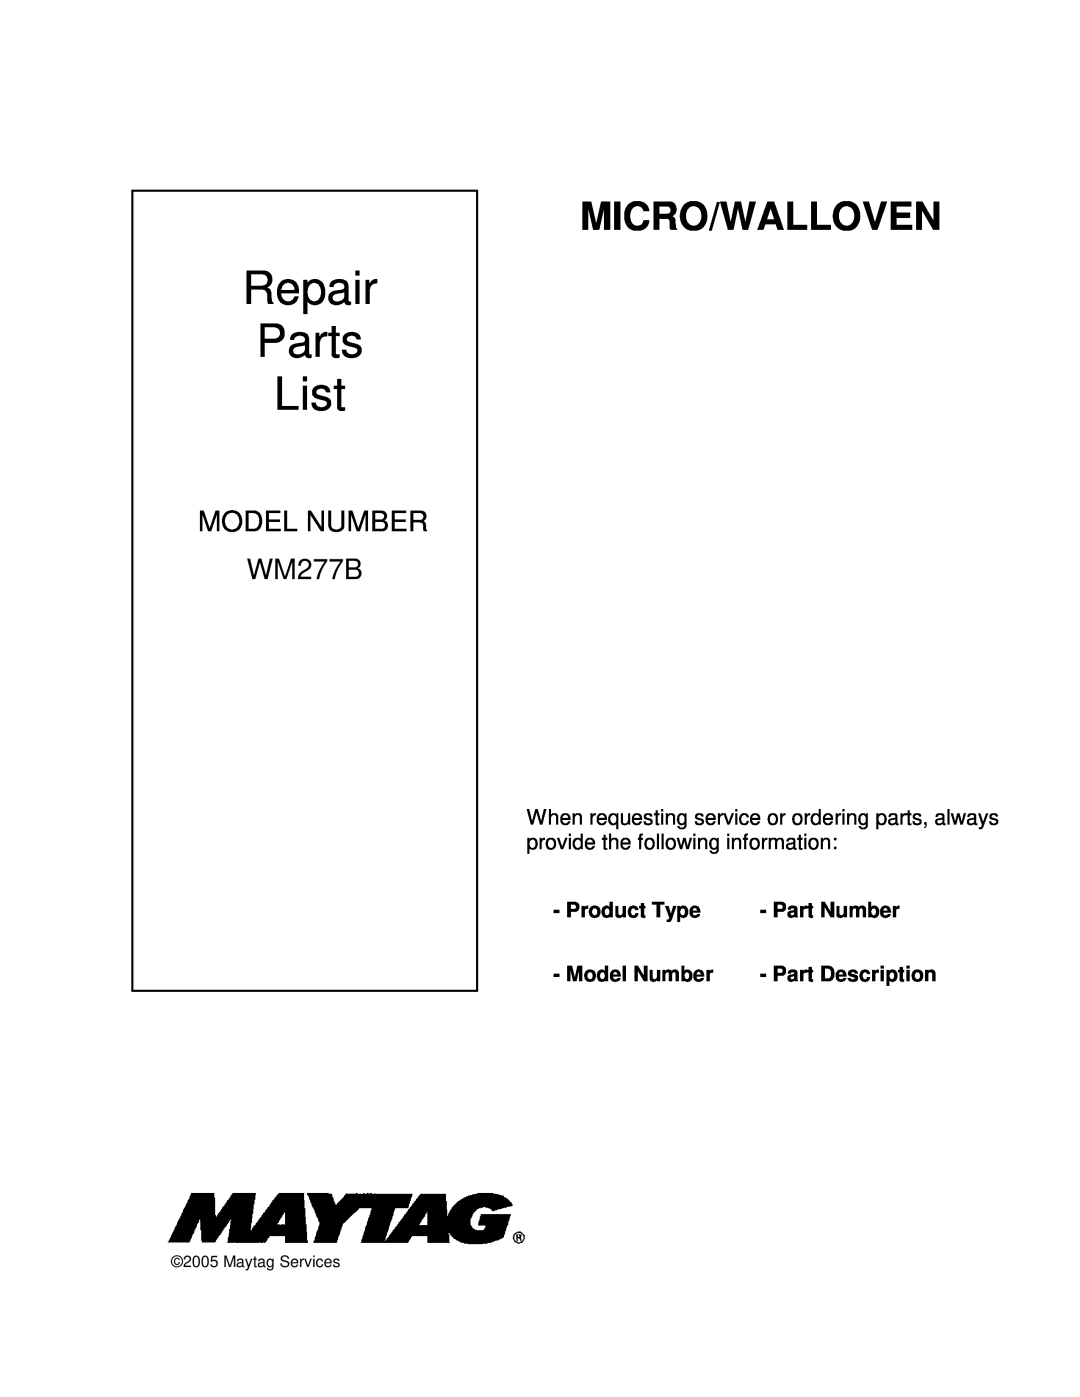 Maytag WM277B manual Product Type, Part Number, Model Number, Part Description, Repair Parts List, Micro/Walloven 